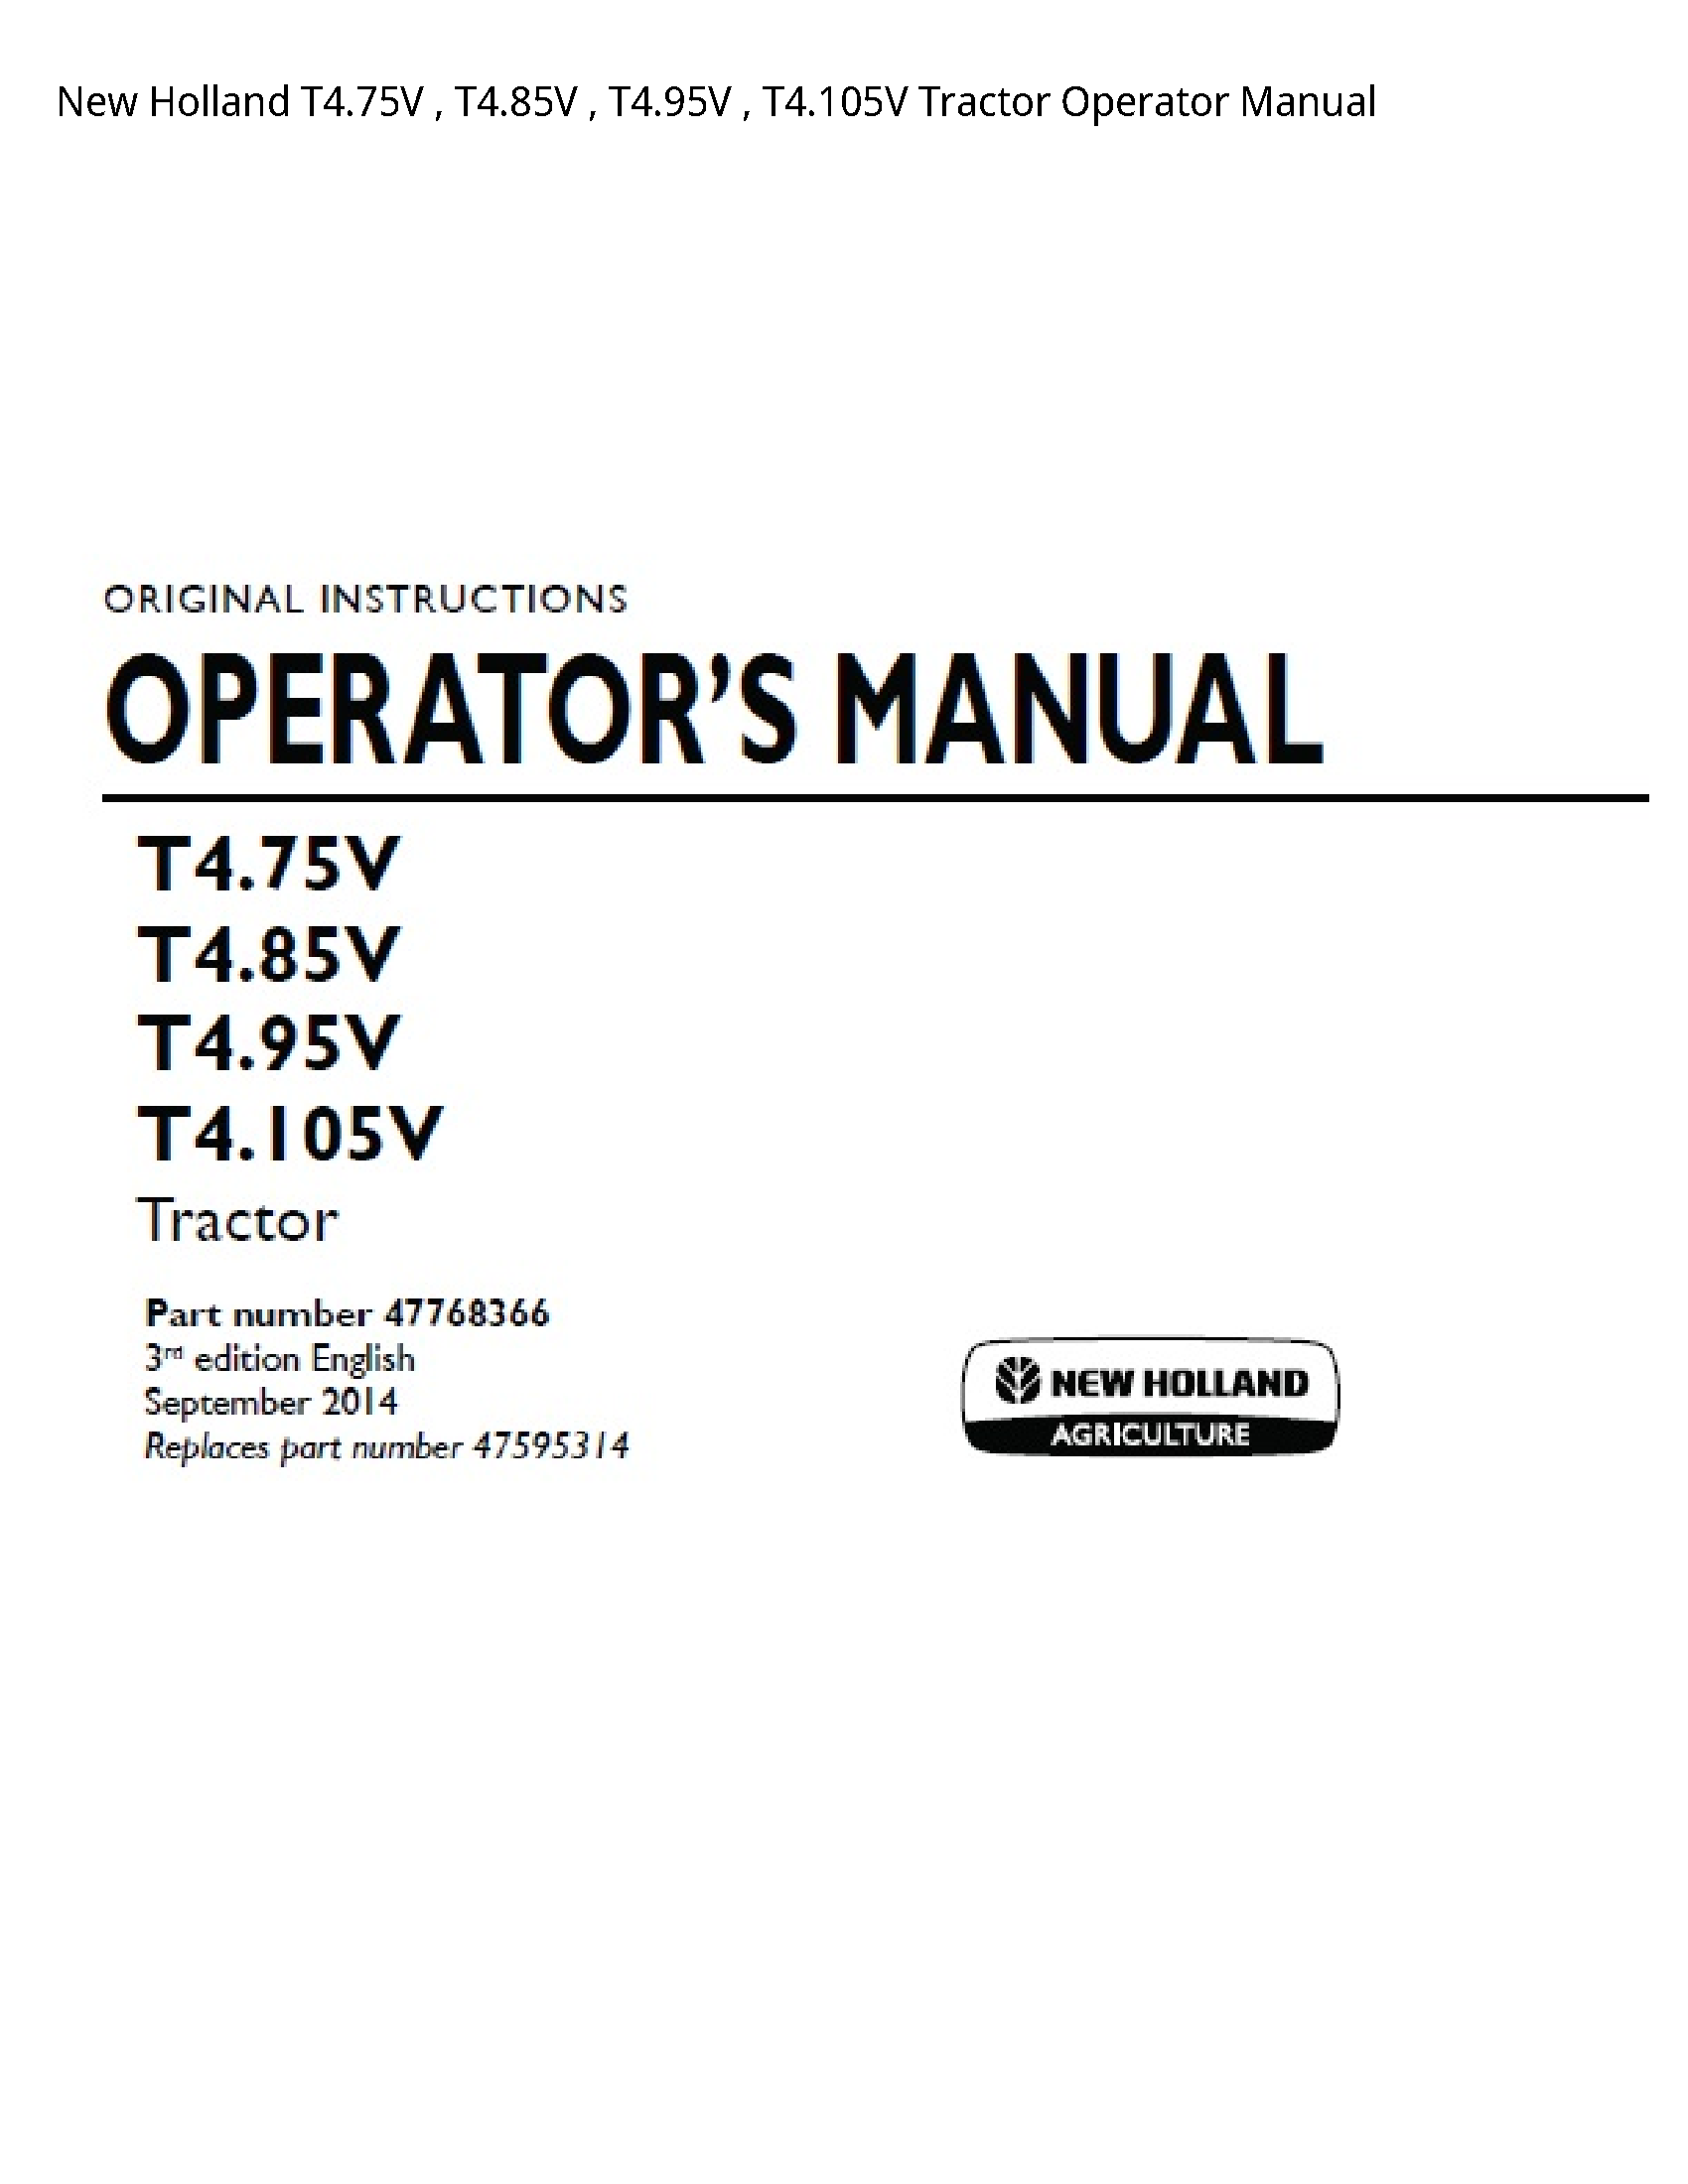 New Holland T4.75V Tractor Operator manual